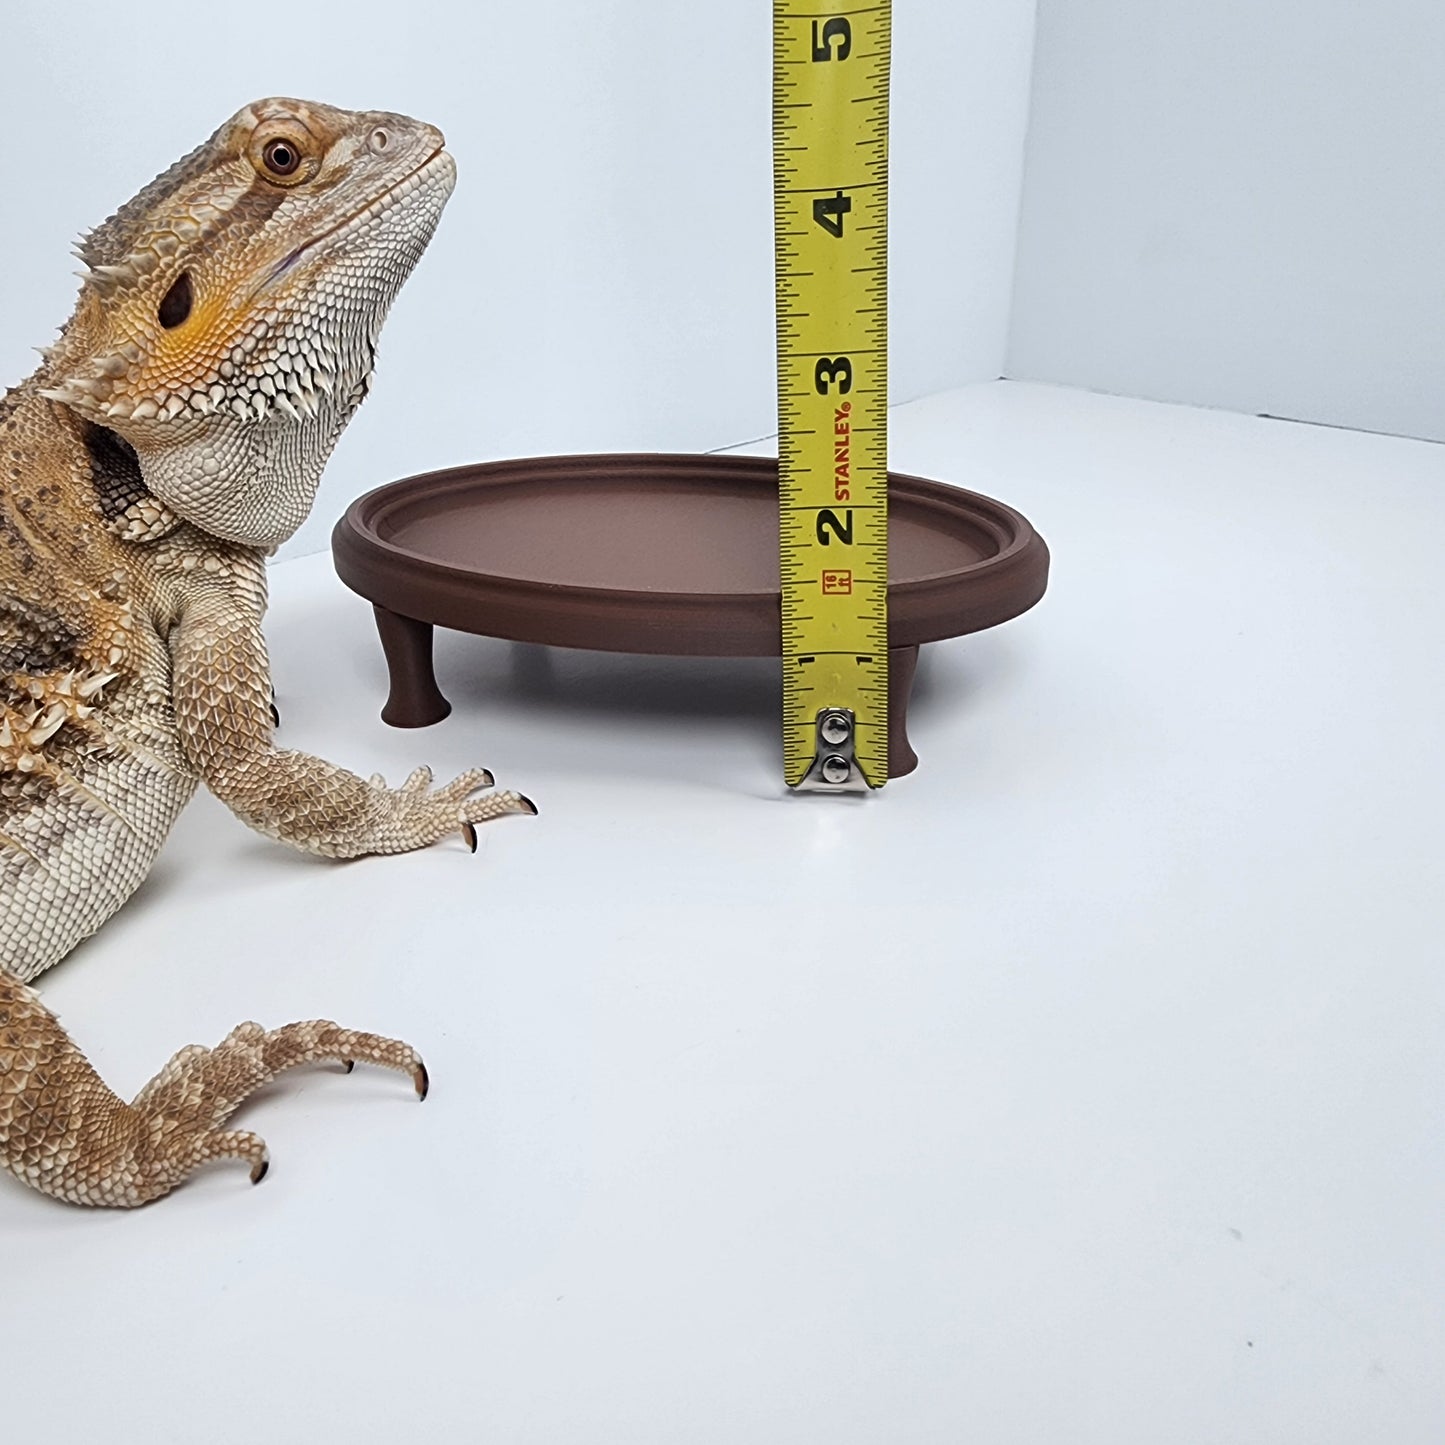 Oval Reptile Coffee table / Large food dish for bearded dragon and Gecko / miniature coffee table/ Reptile decor | EXCLUSIVE